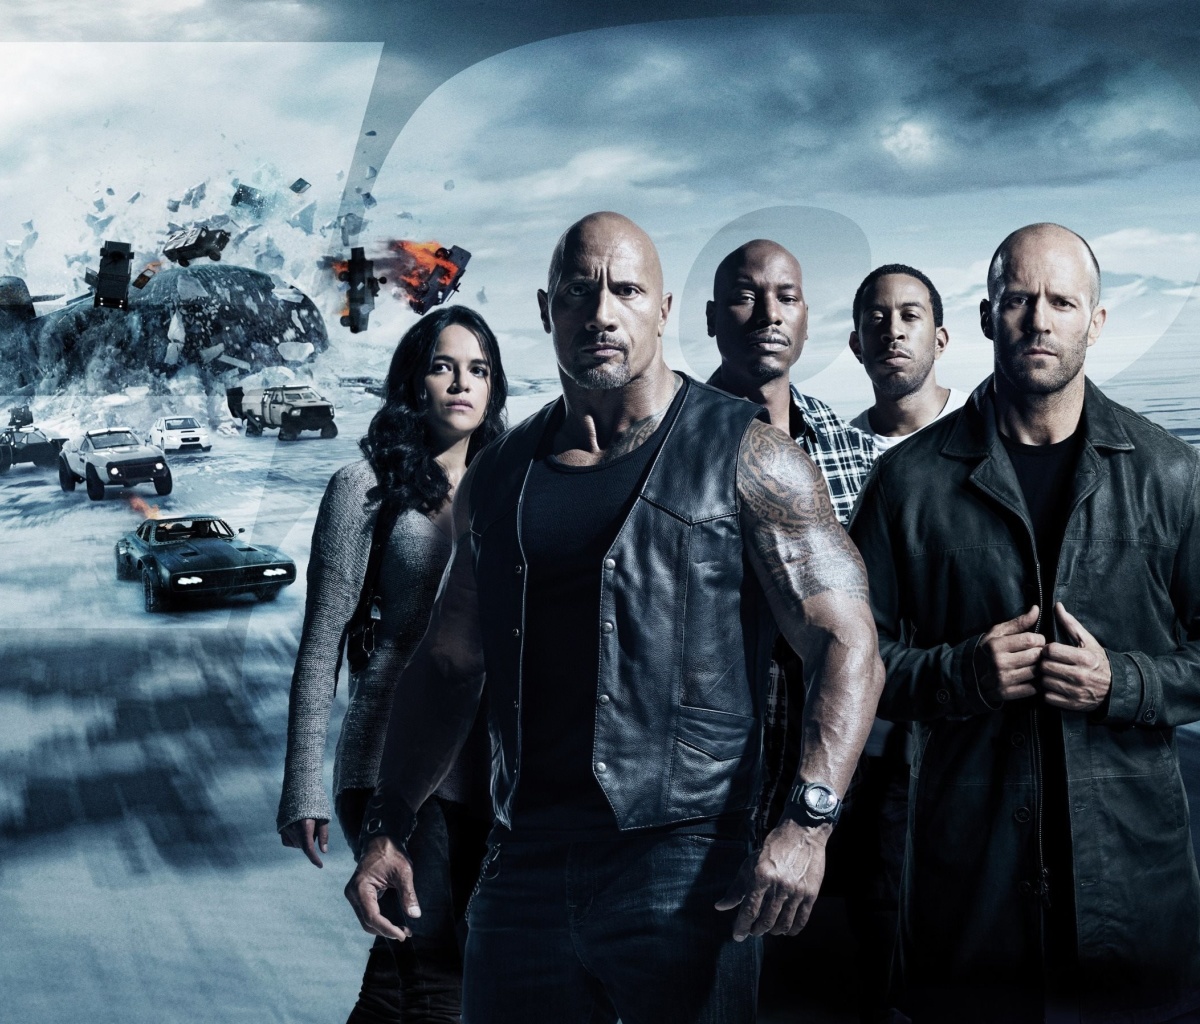 The Fate of the Furious with Vin Diesel, Dwayne Johnson, Charlize Theron screenshot #1 1200x1024